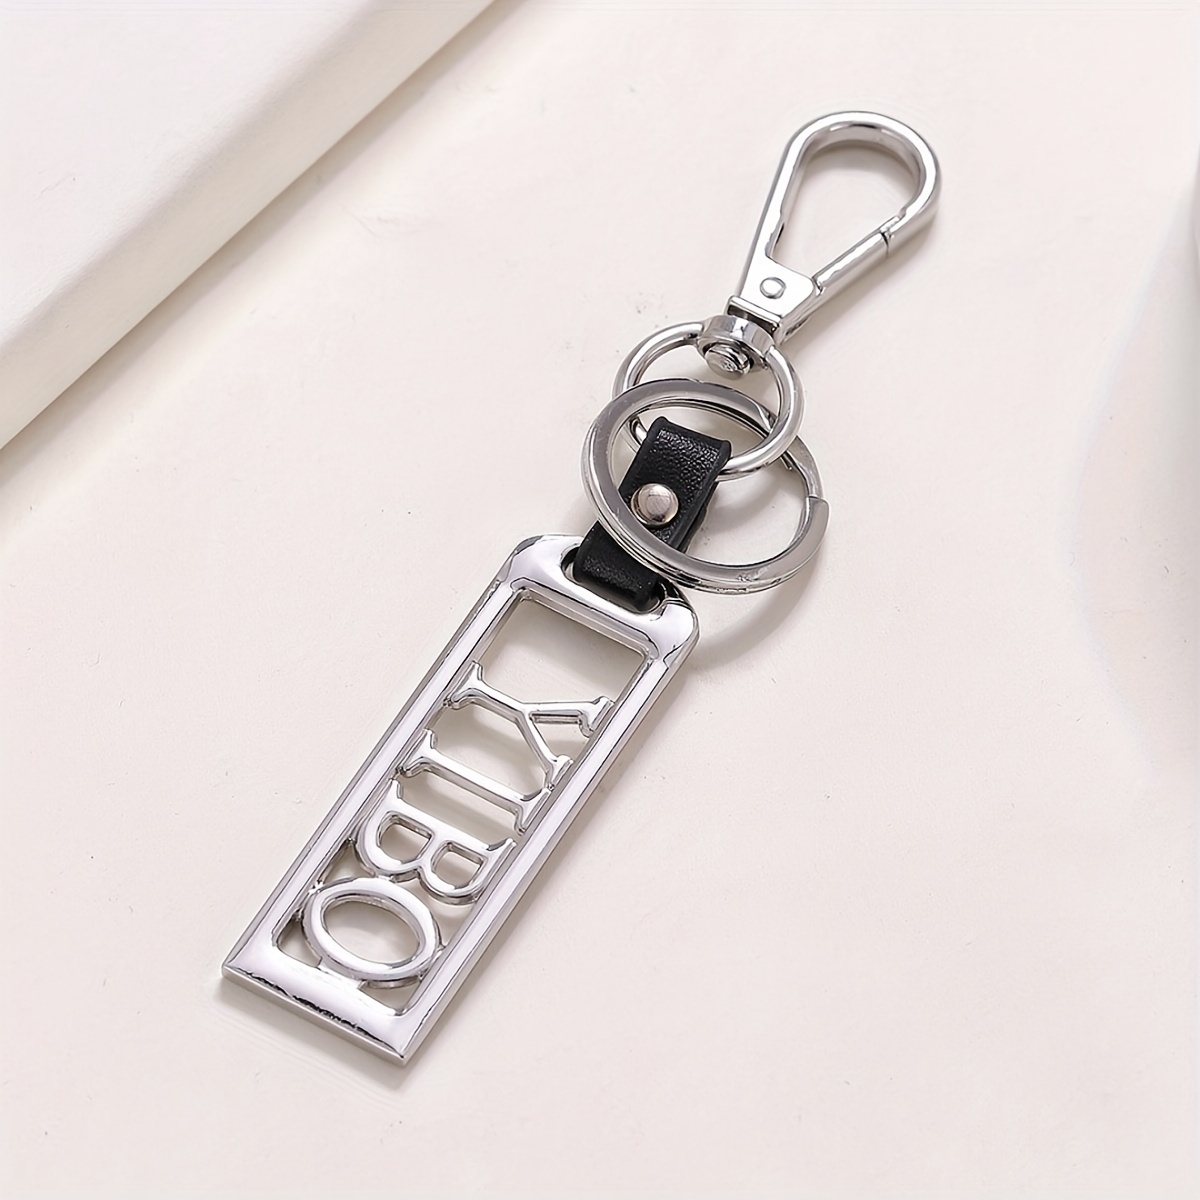 Mens Waist Hanging Keychain Zinc Alloy Silver Plated Creative Car Key Chain  Hanging Key Ring Ring Lock Keychain For Men, 24/7 Customer Service